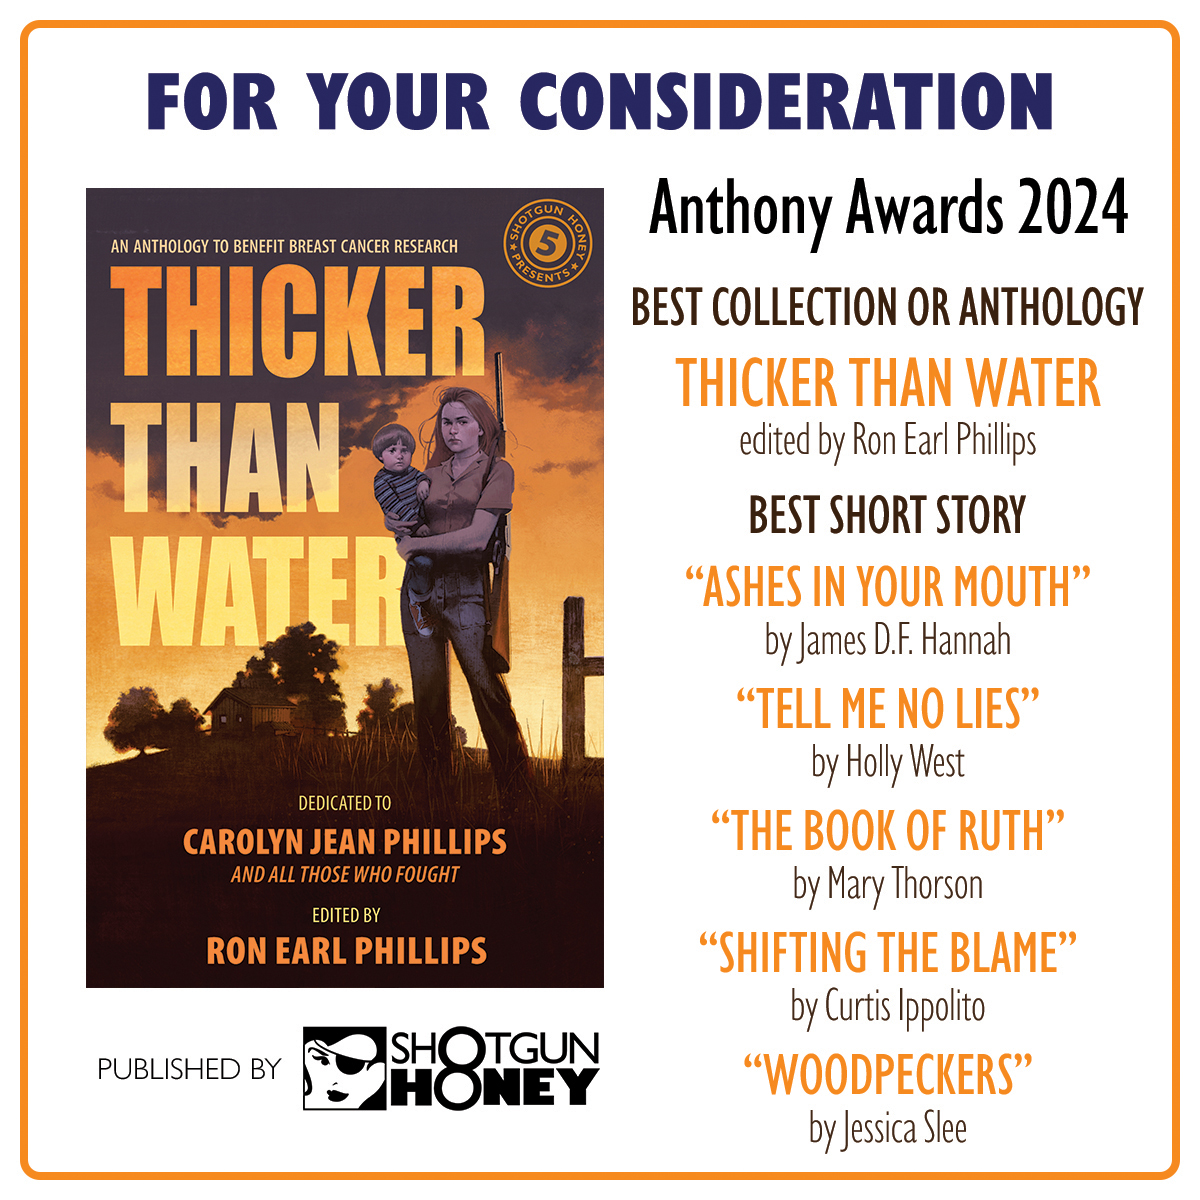 For you consideration for 2024 Anthony Award for Best Anthology and Collection and Best Short Story. Thicker Than Water edited by Ron Earl Phillips.